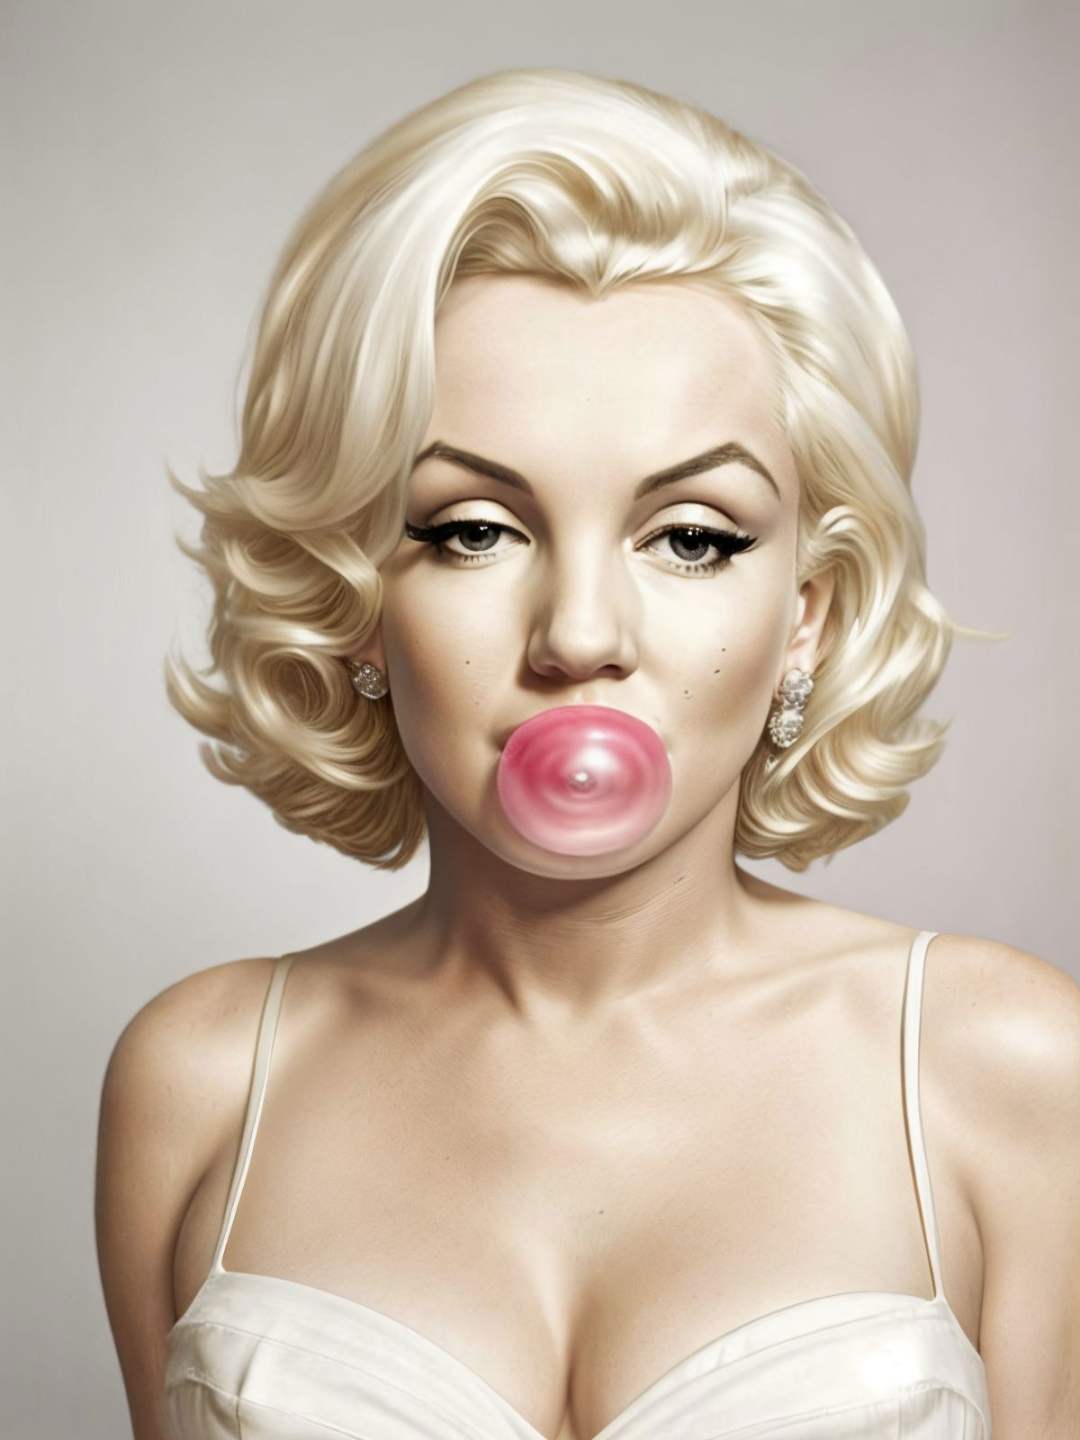 RAW Marilyn Monroe, looks at the camera, blonde, open shoulders, mole, light background, bokeh, ornate background. one big bubble gum, blowing bubble gum, white bubble gum, blow gum  <lora:Bubble Gum:0.5>